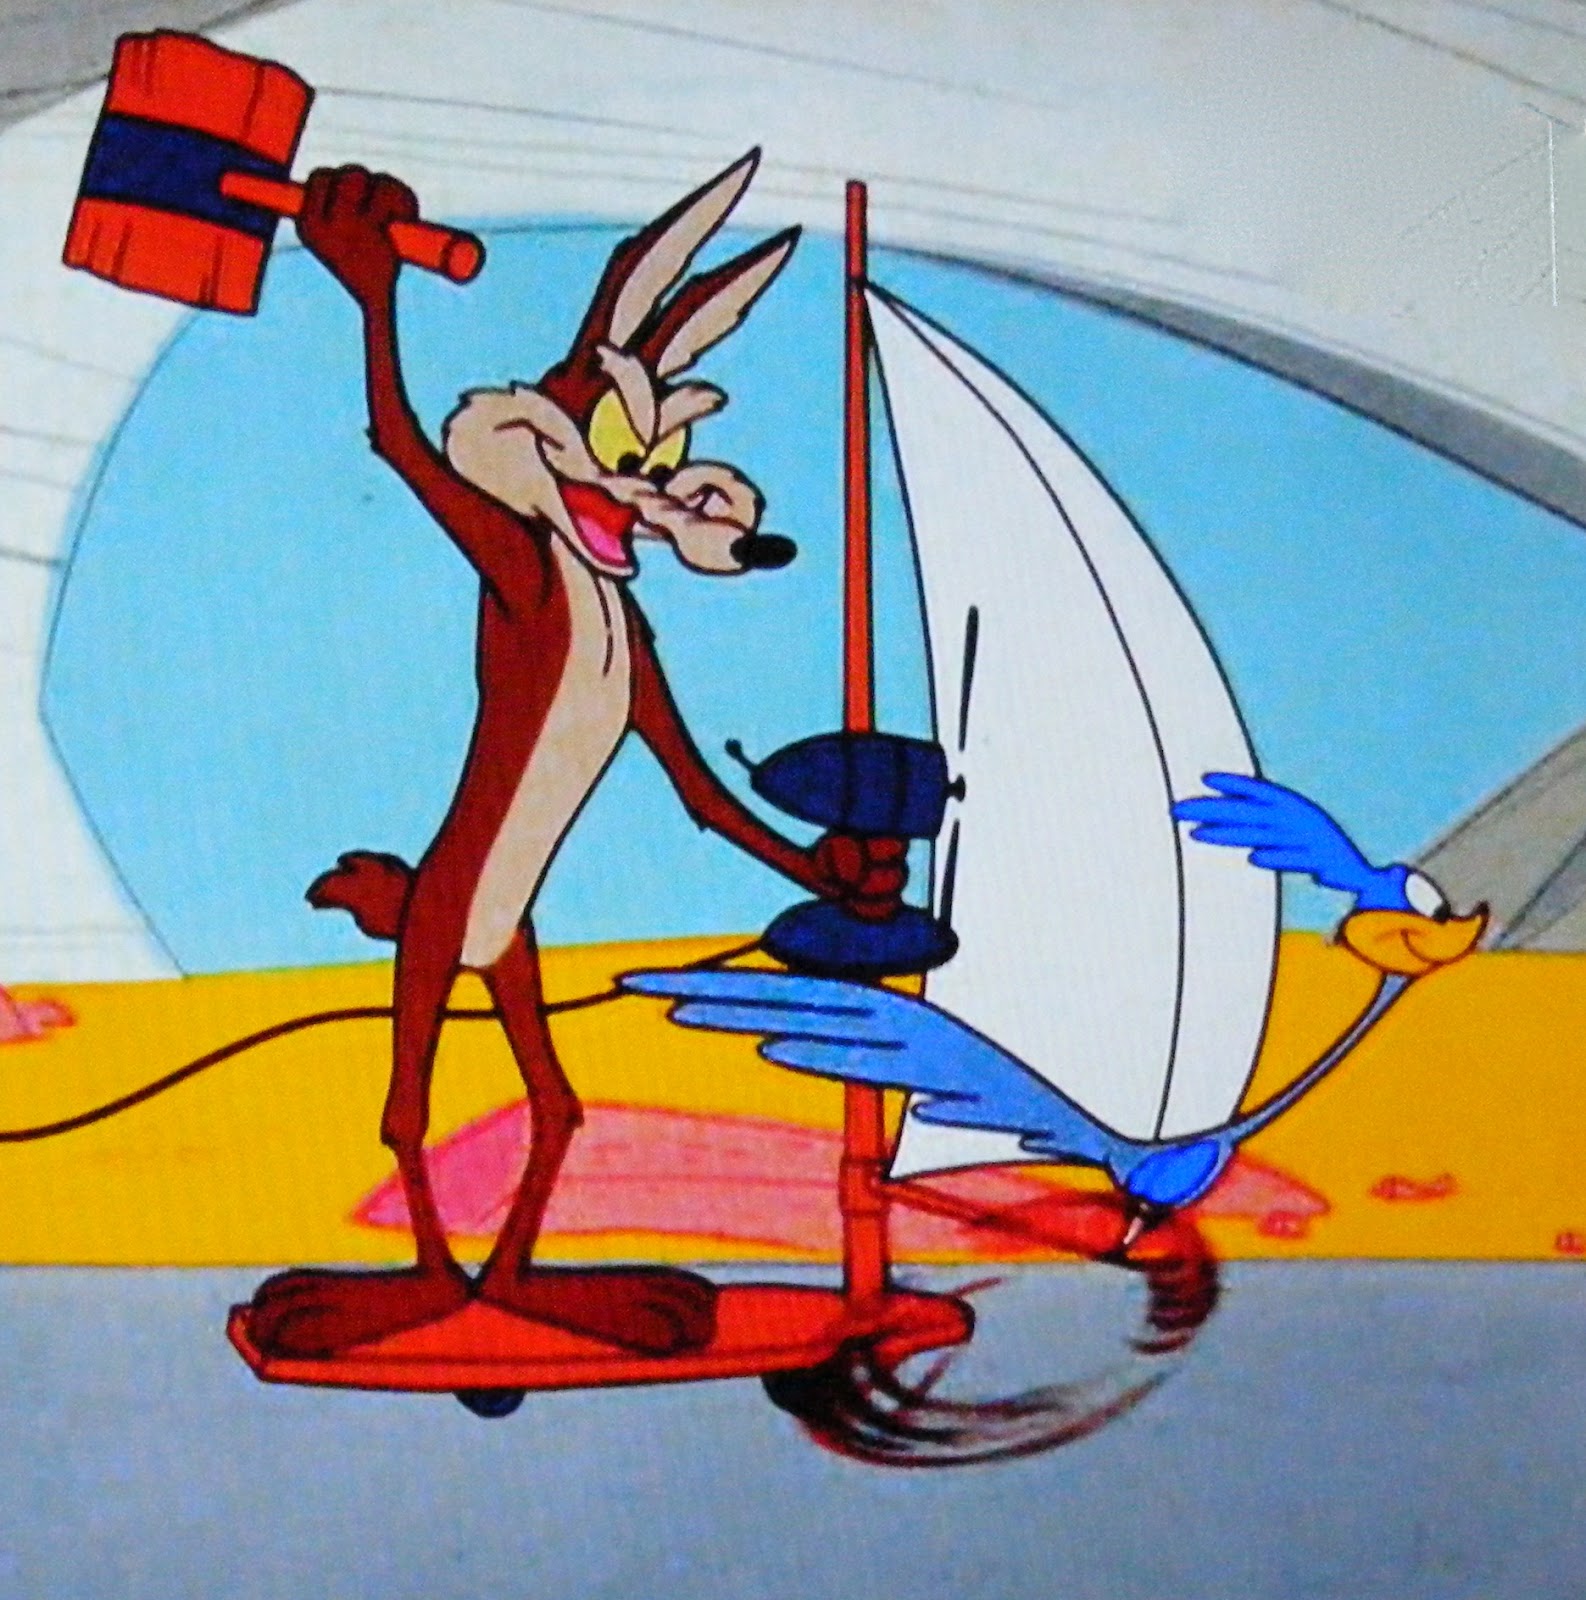 ... -wallpaper.com/photo/wile_e_coyote_wallpapers_download/33.html